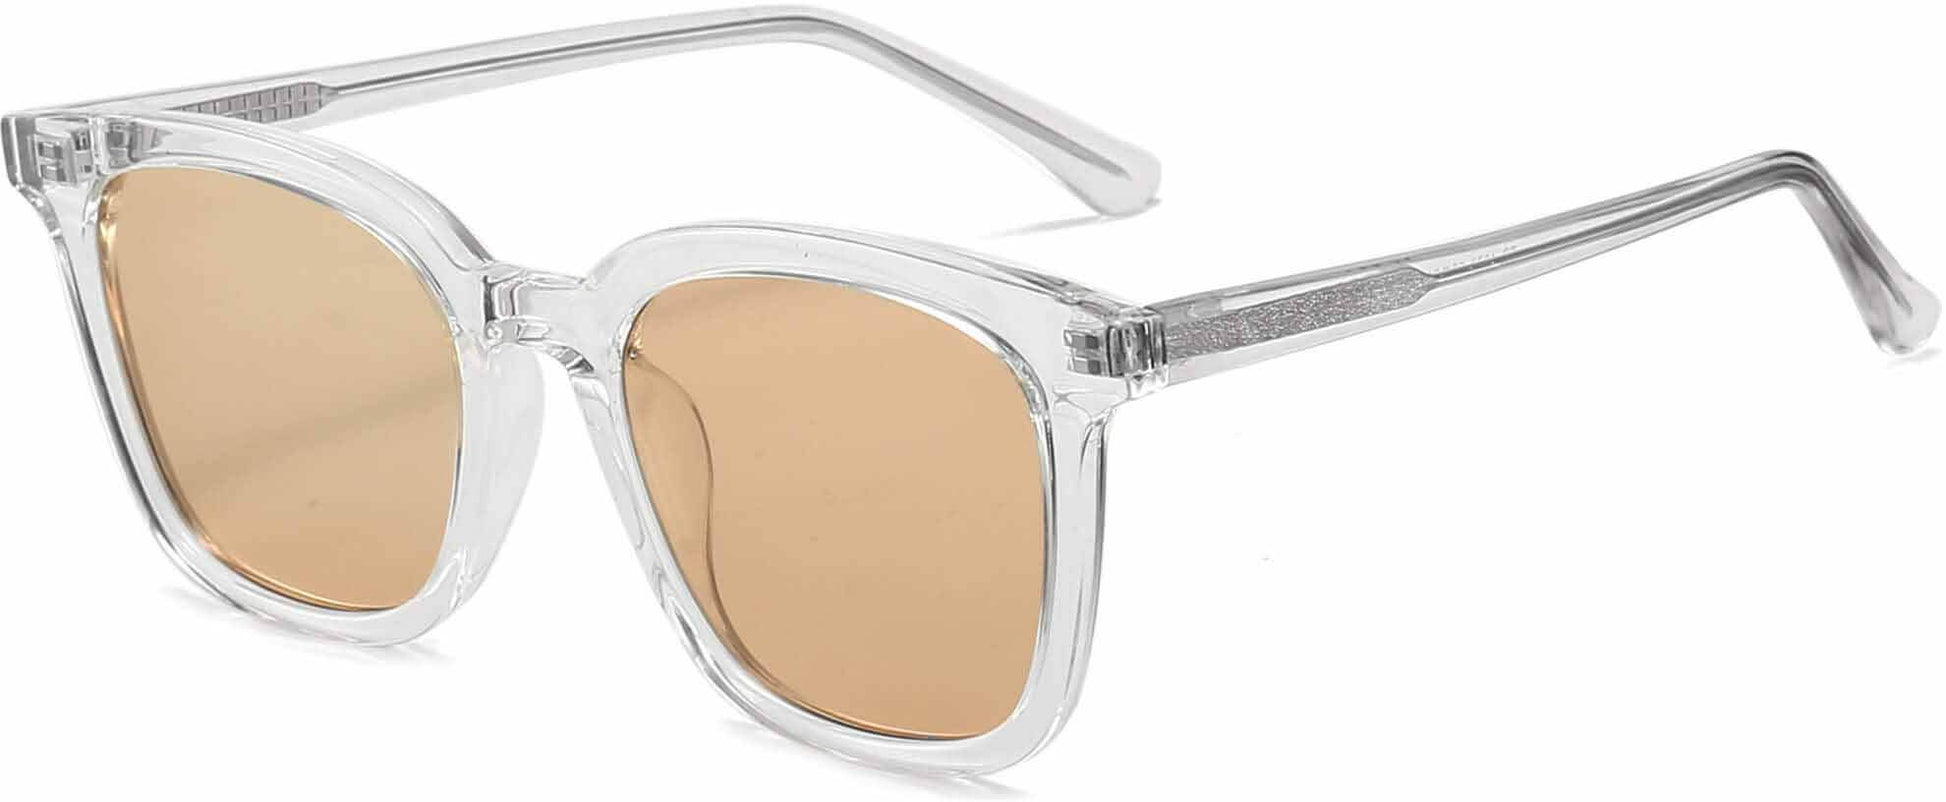 Bryson Clear Acetate Sunglasses from ANRRI, angle view